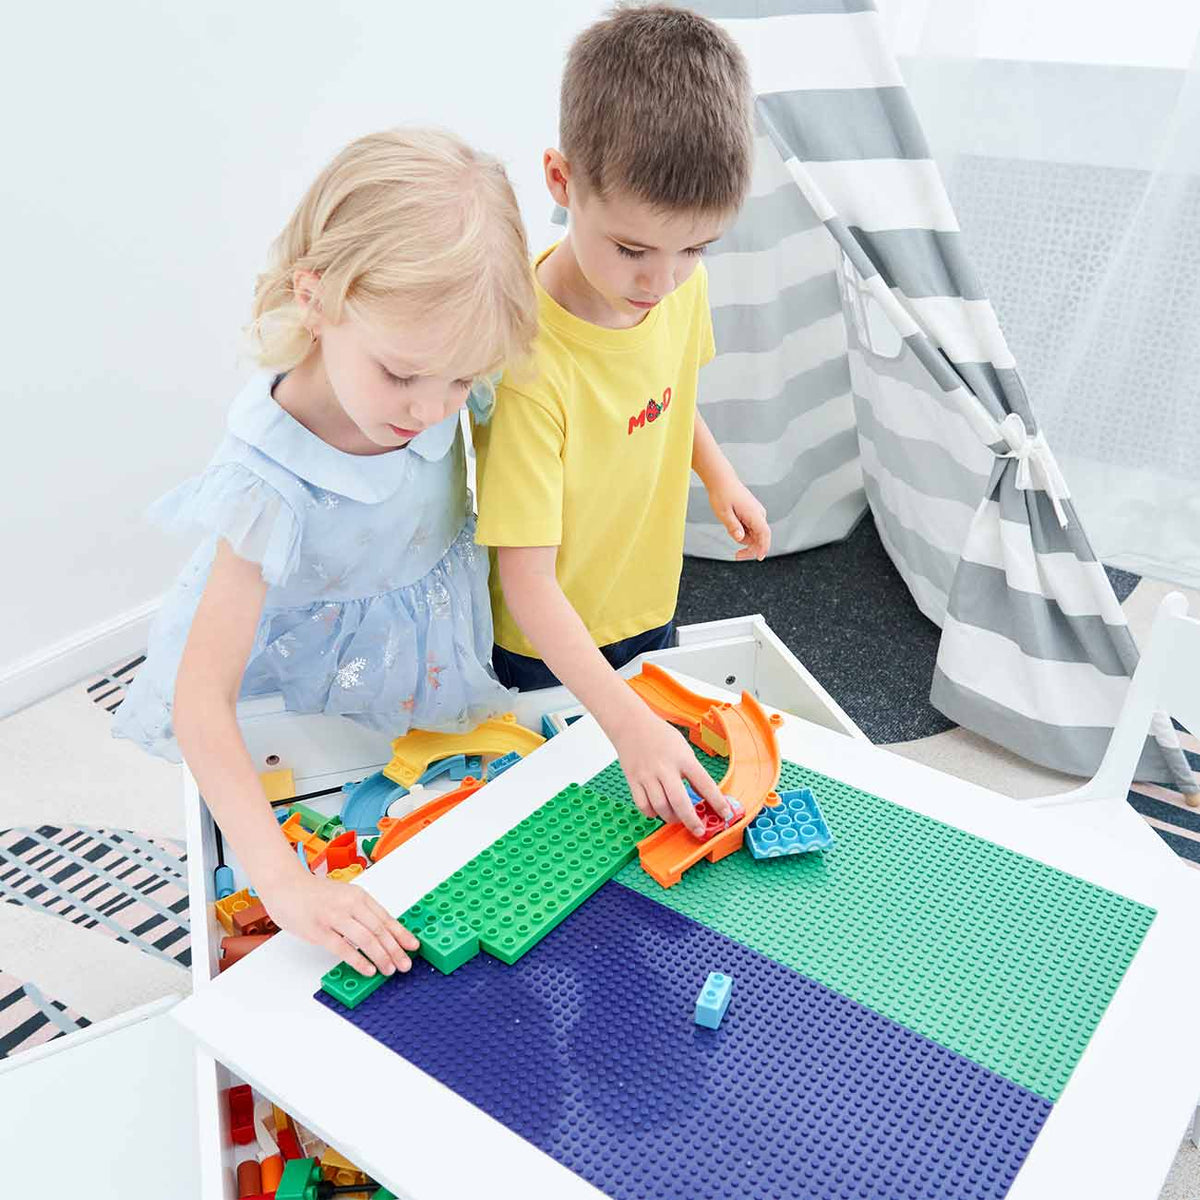 Kid's 3-in-1 White Wooden Table & 2 Chairs with Lego Board and Storage –  www.littlehelper.co.uk